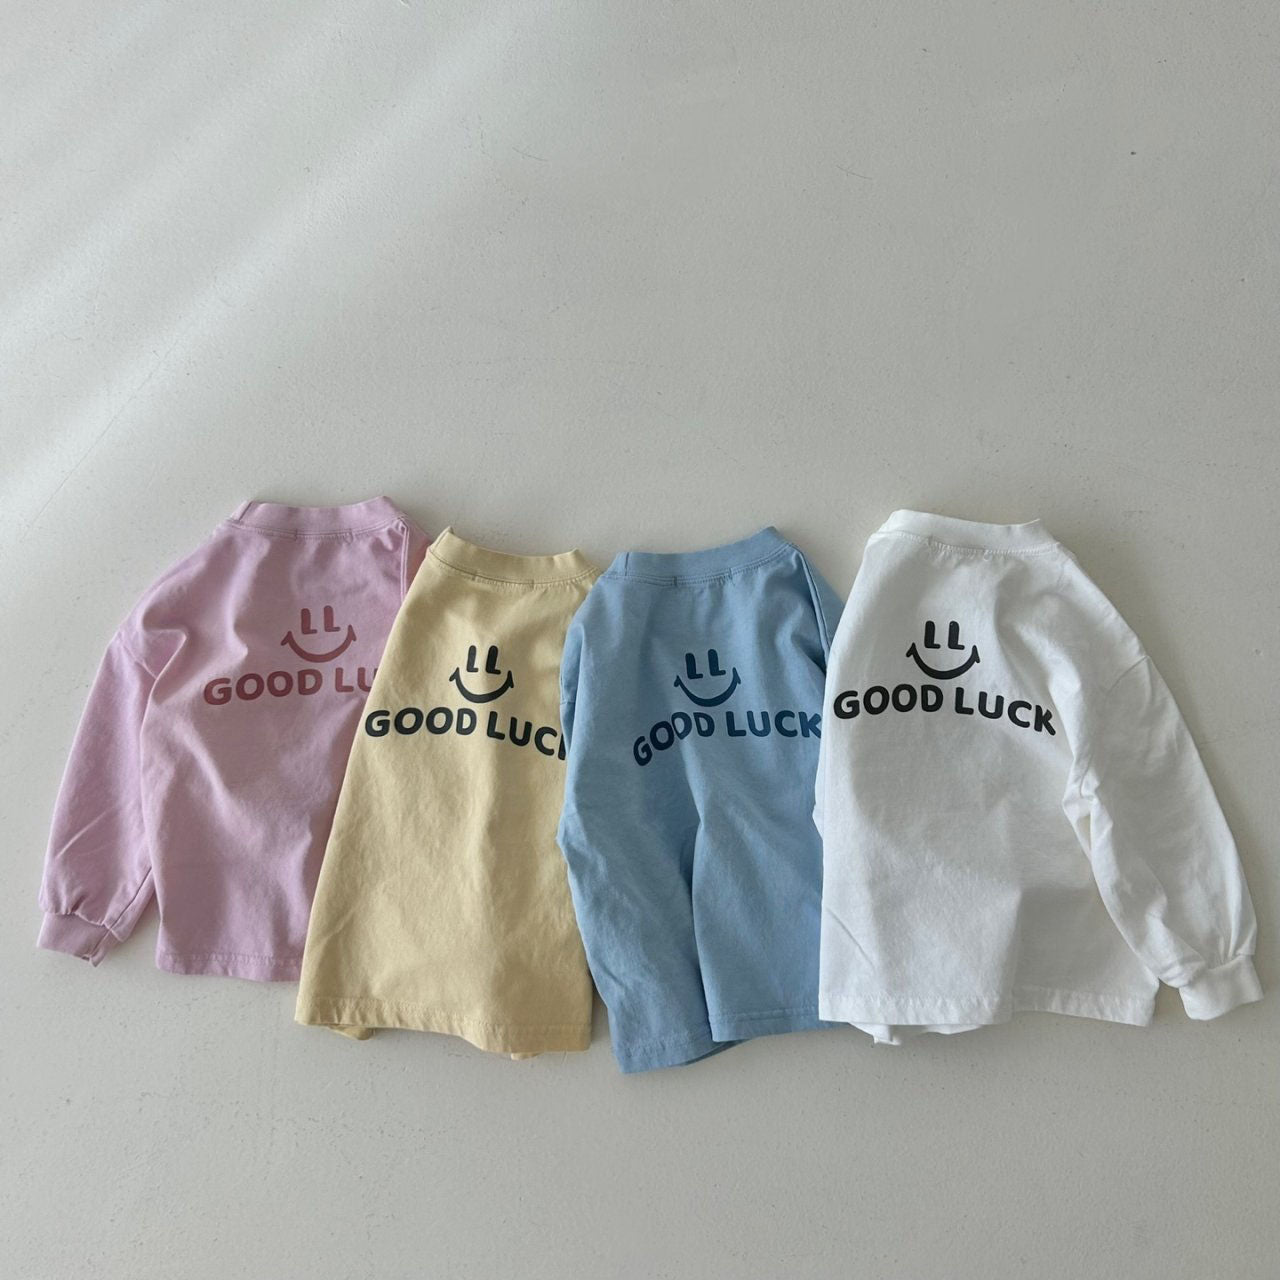 Toddler Land S24 Long Sleeve 'GOOD LUCK' Tee (4m-6y) - 4 Colors